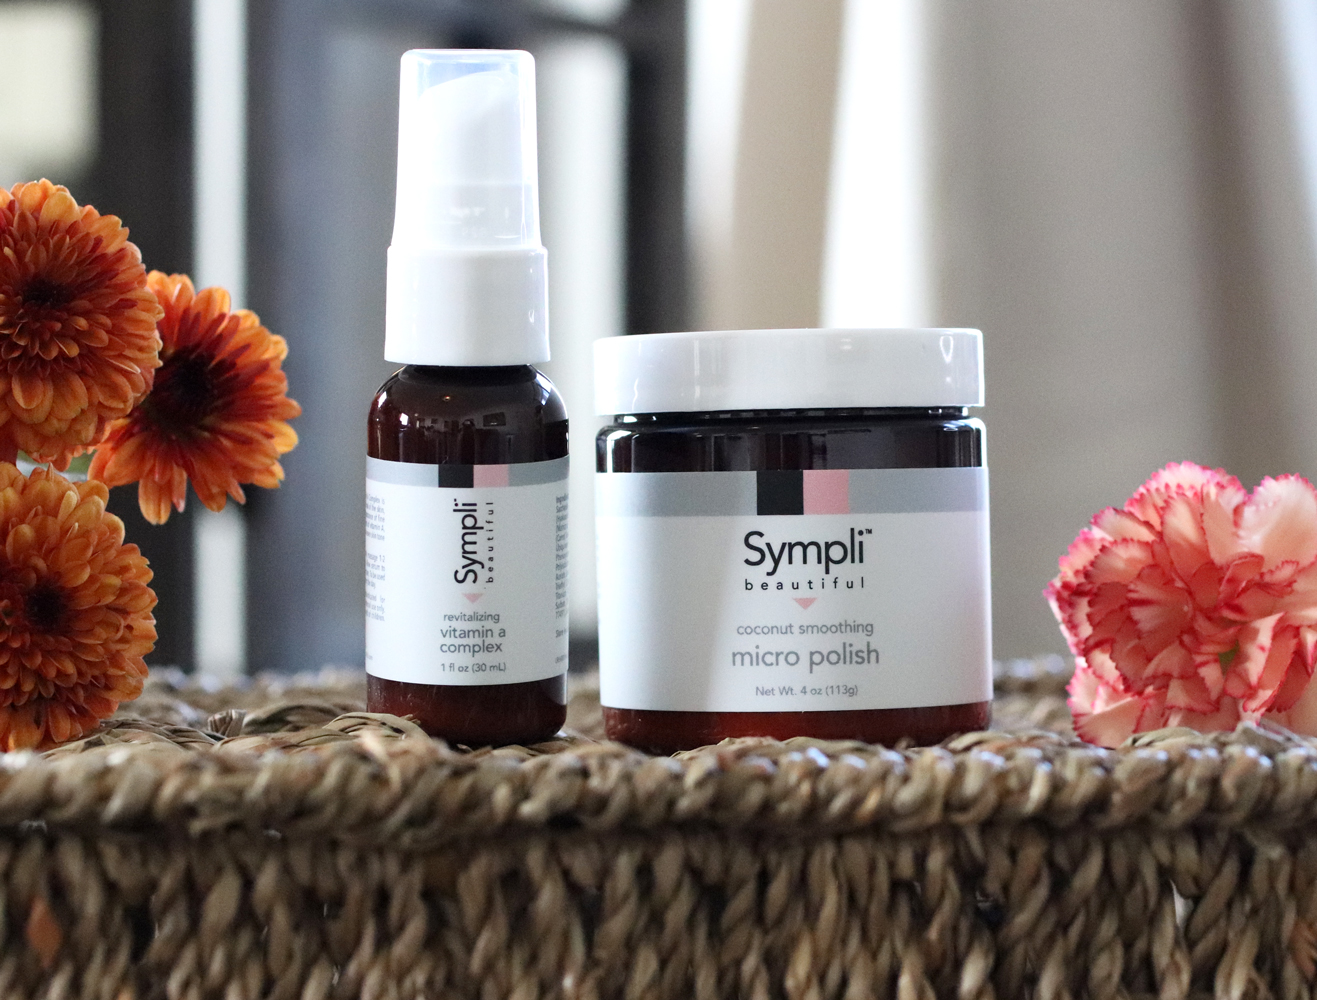 Sympli Beautiful at iHerb cruelty free skincare review